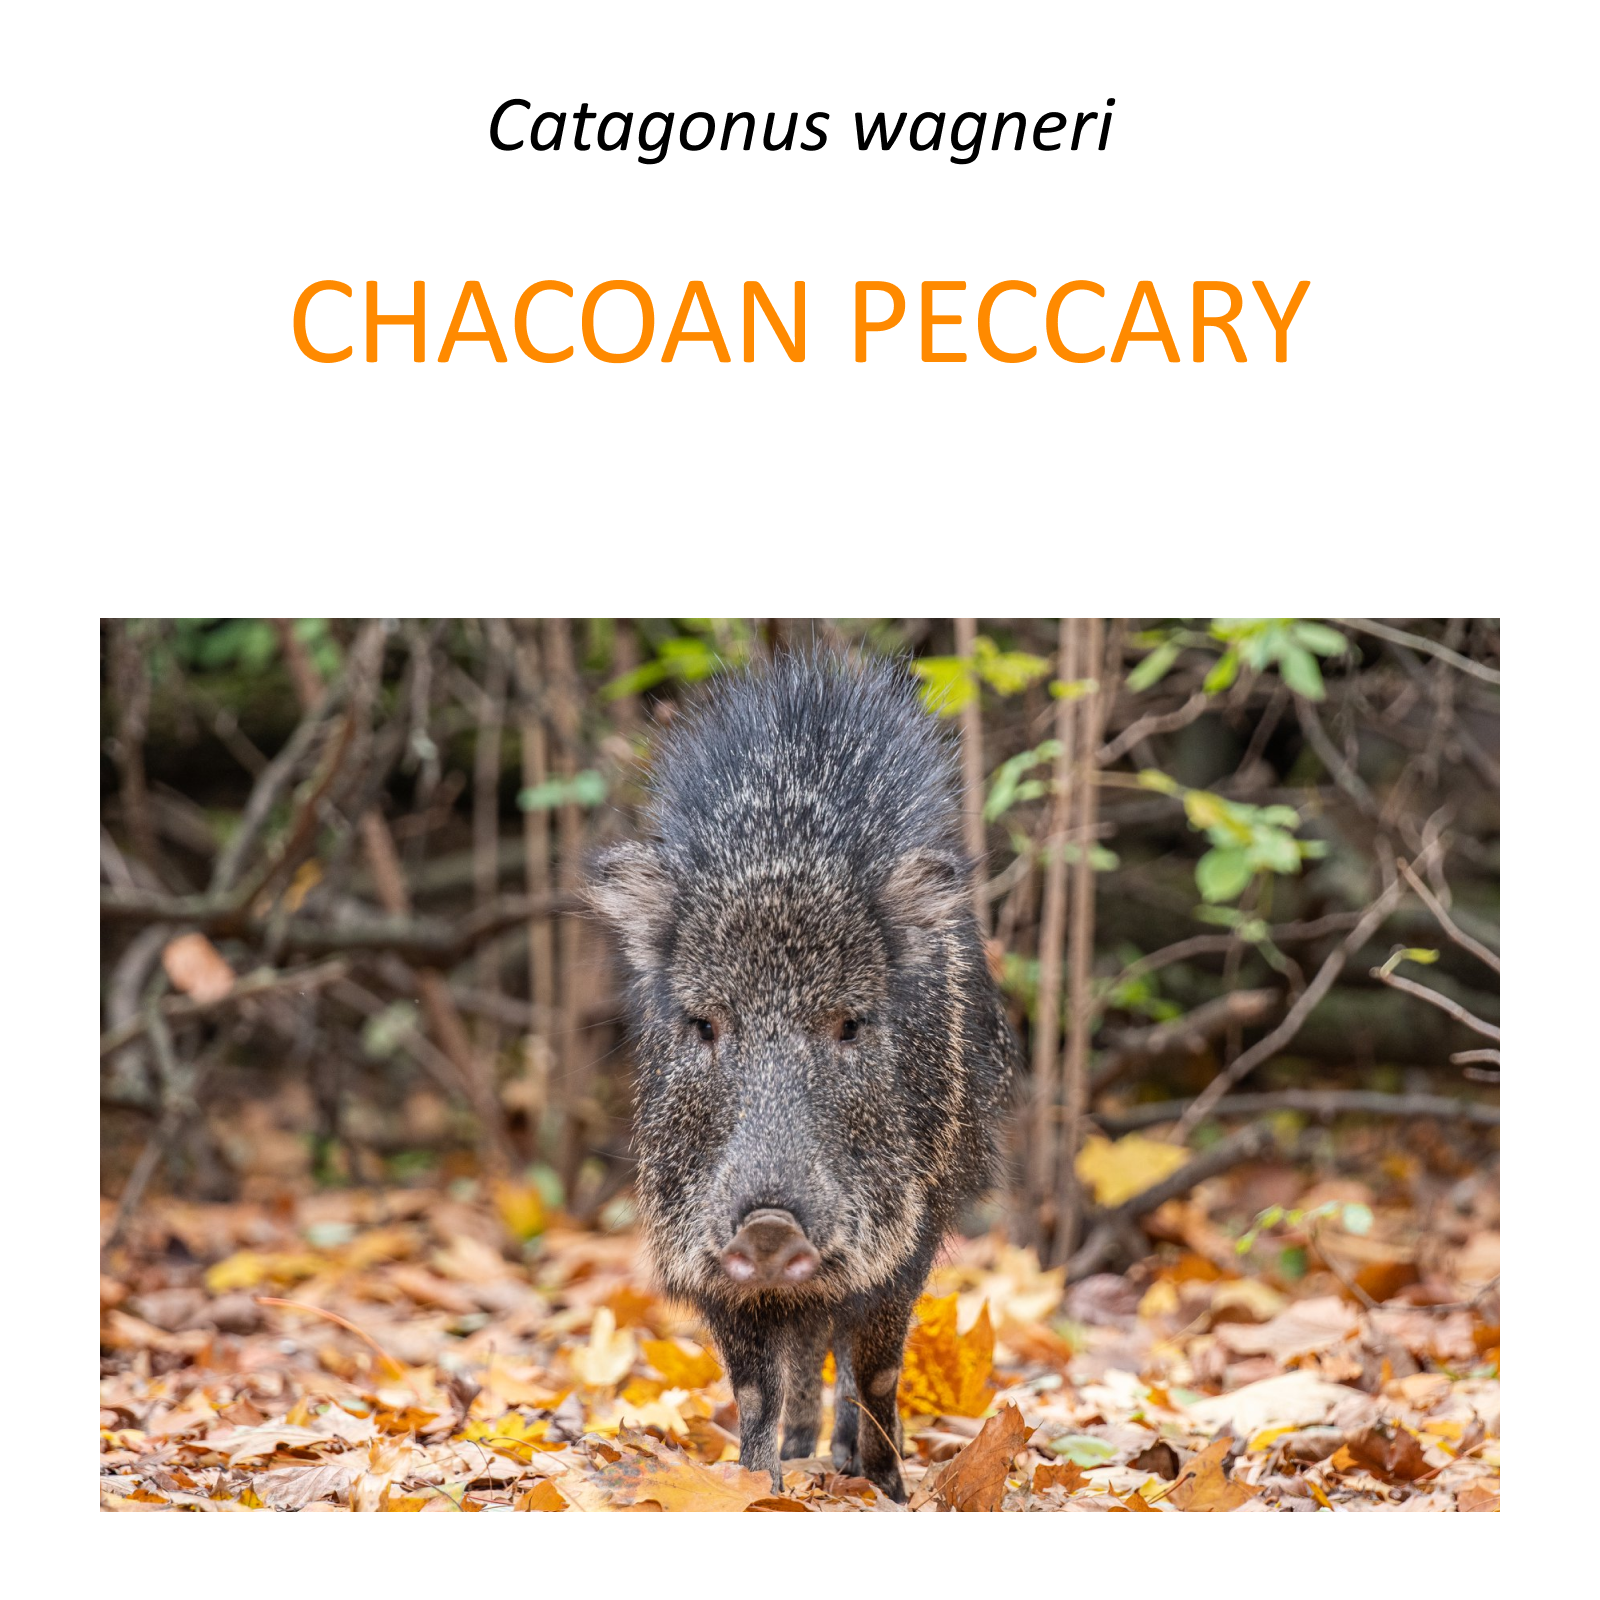 Chacoan peccary conservation project